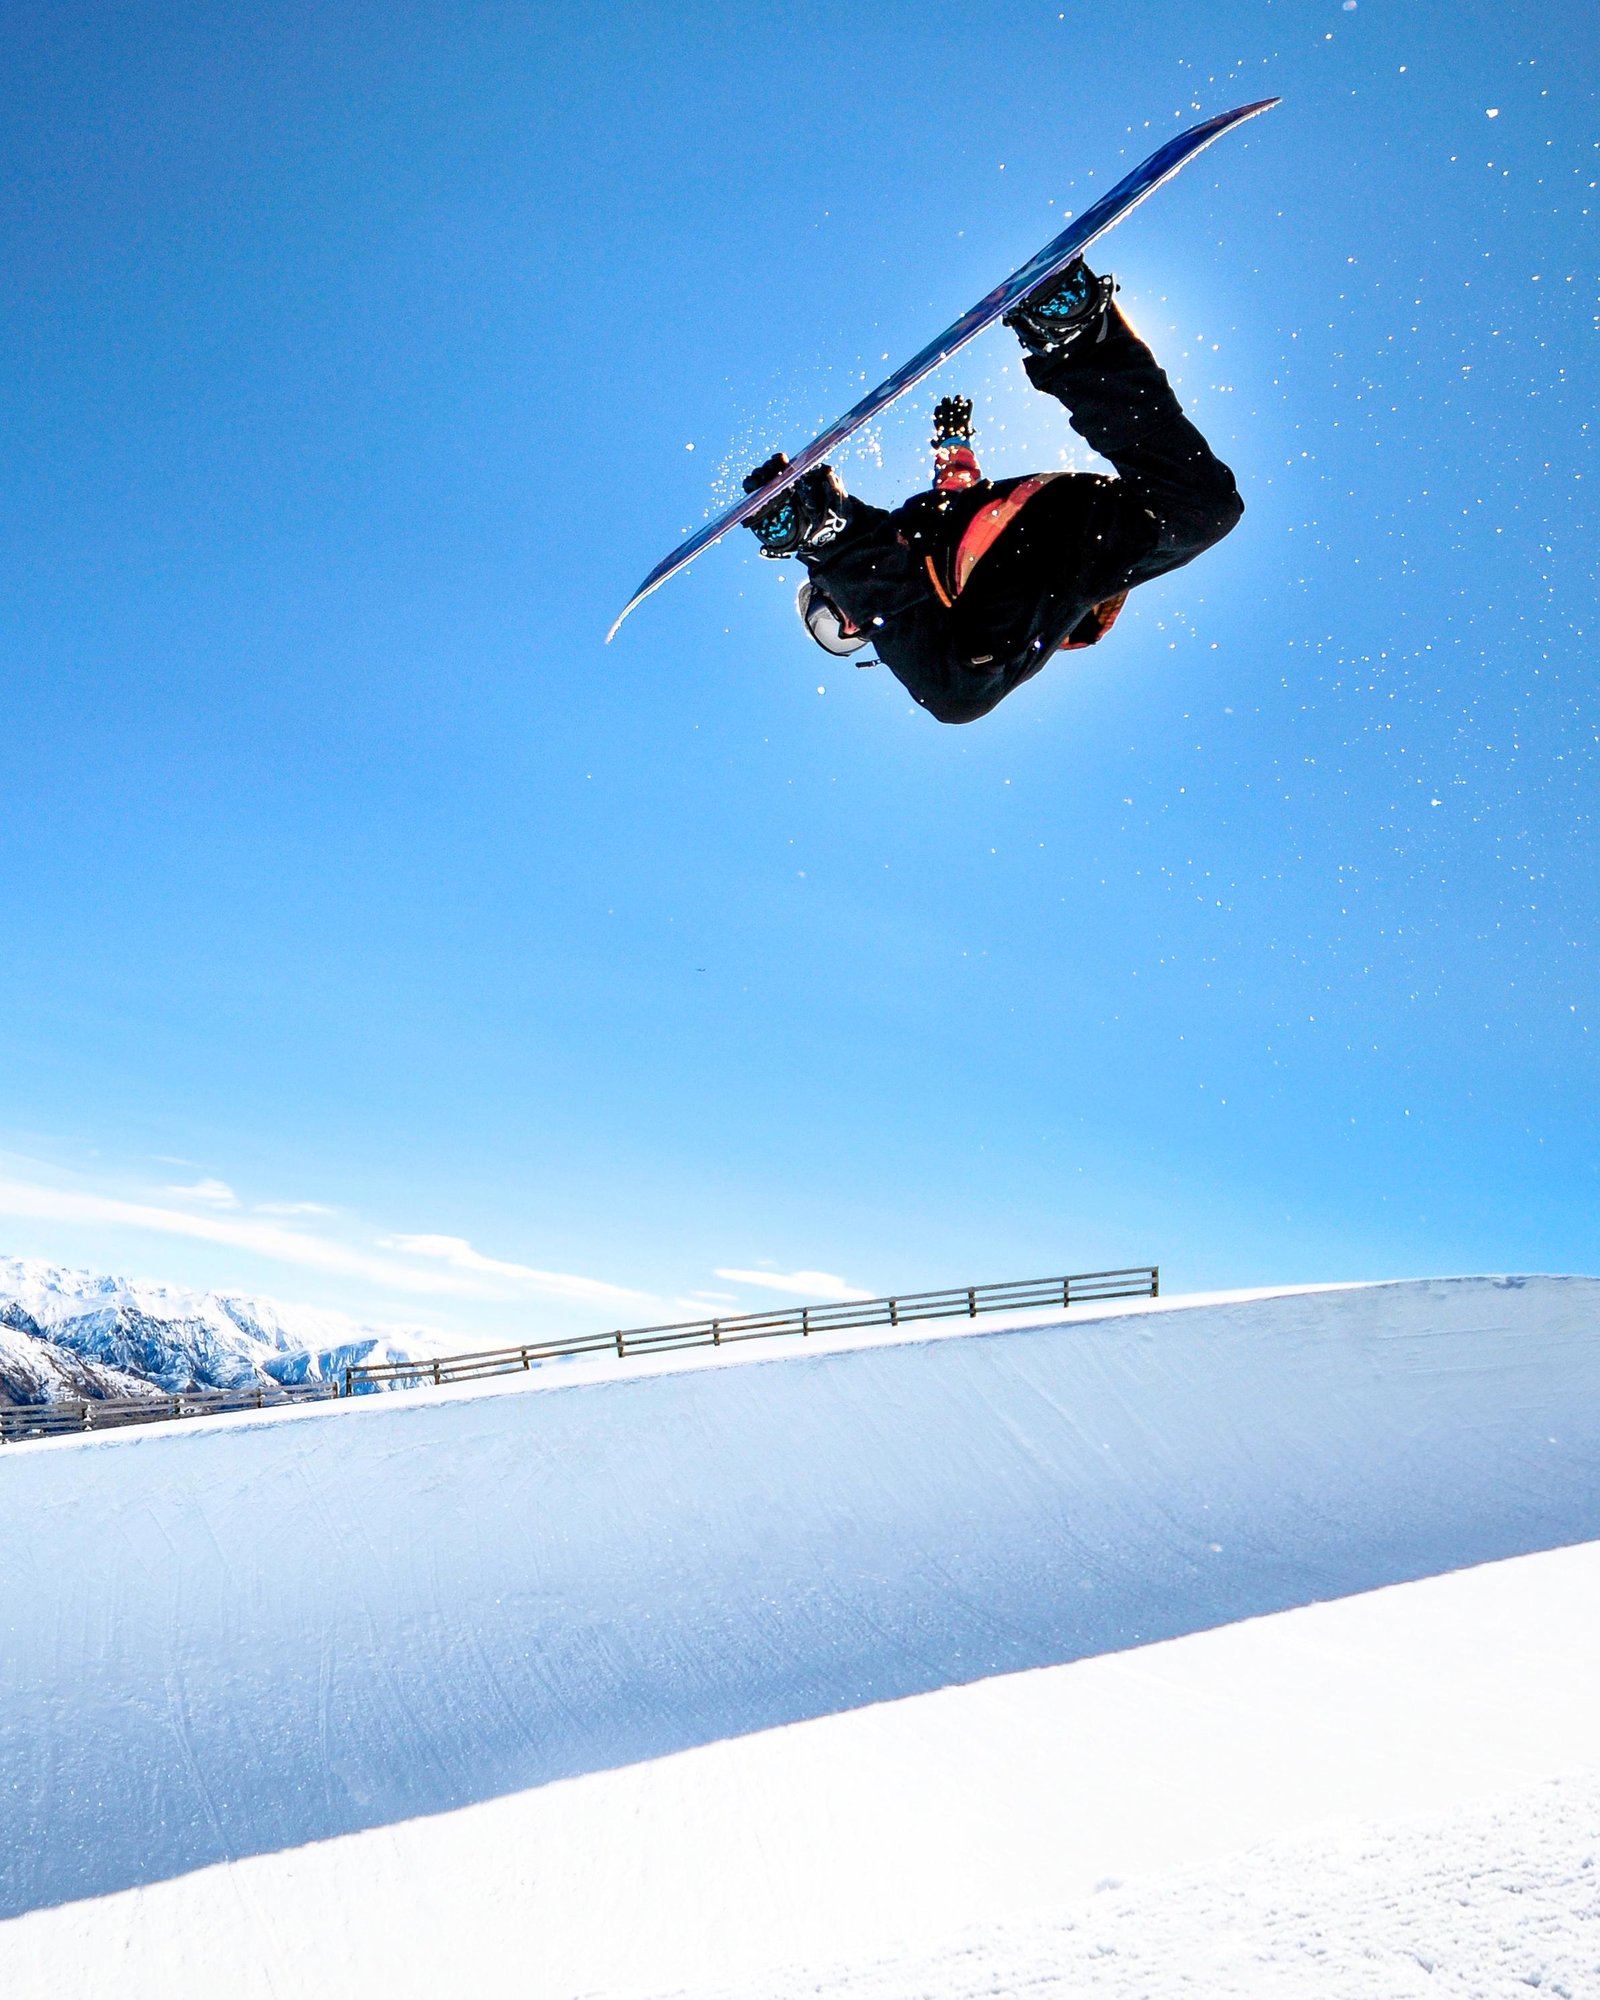 Lesley McKenna on how to become a top snowboarder